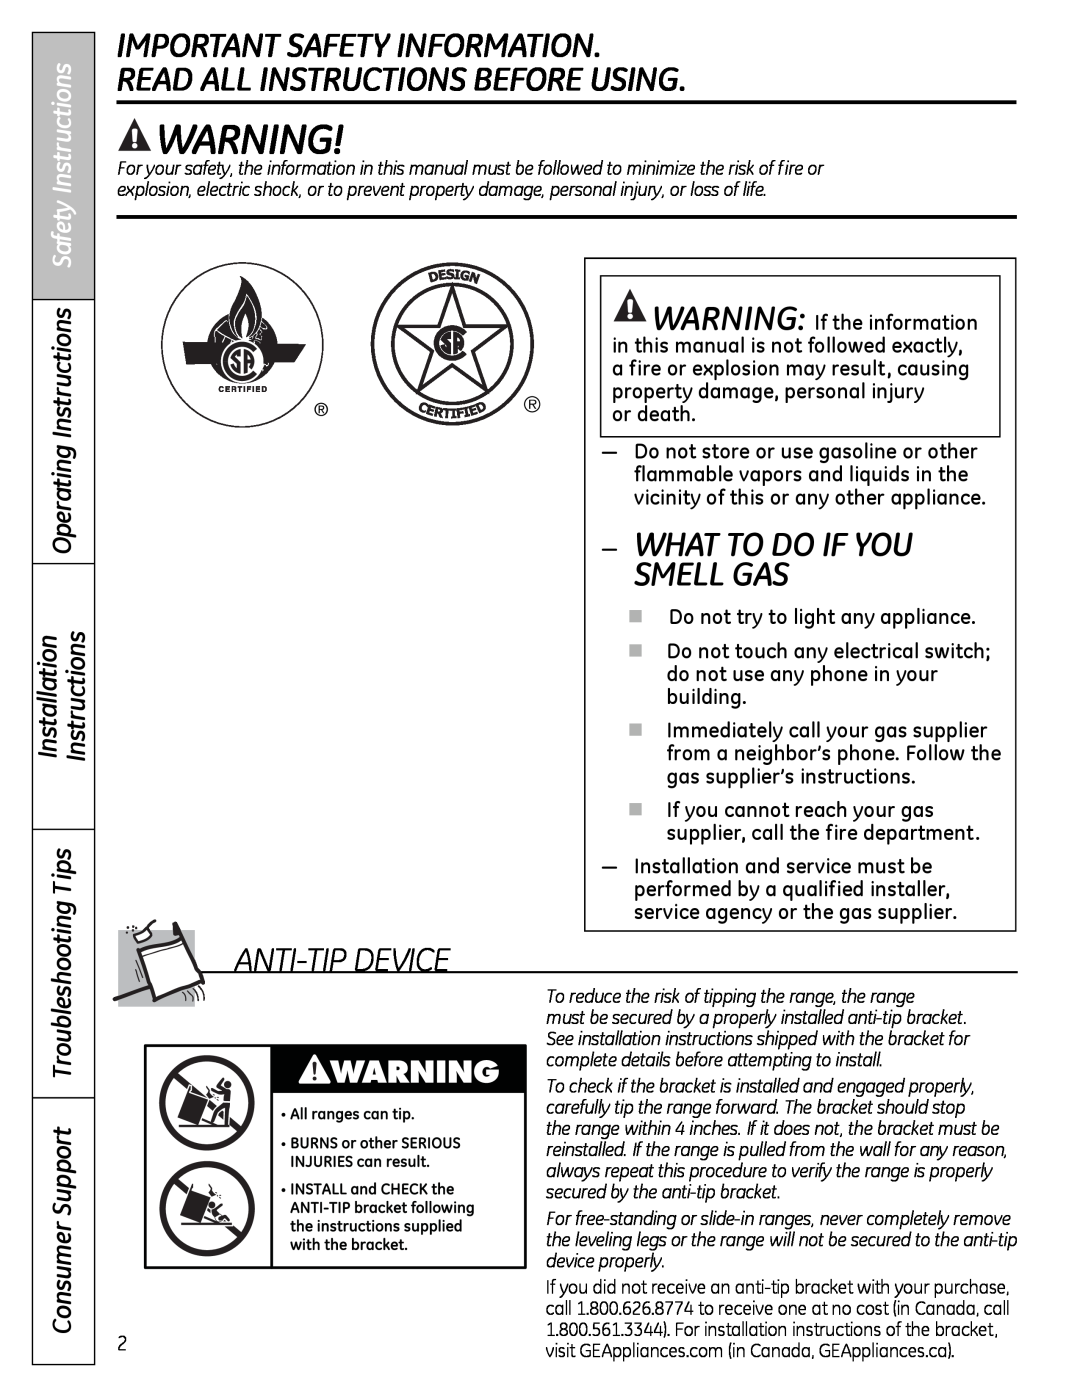 GE JGB805 Important Safety Information Read All Instructions Before Using, What To Do If You, Smell Gas, aNTI-TIP DeVICe 